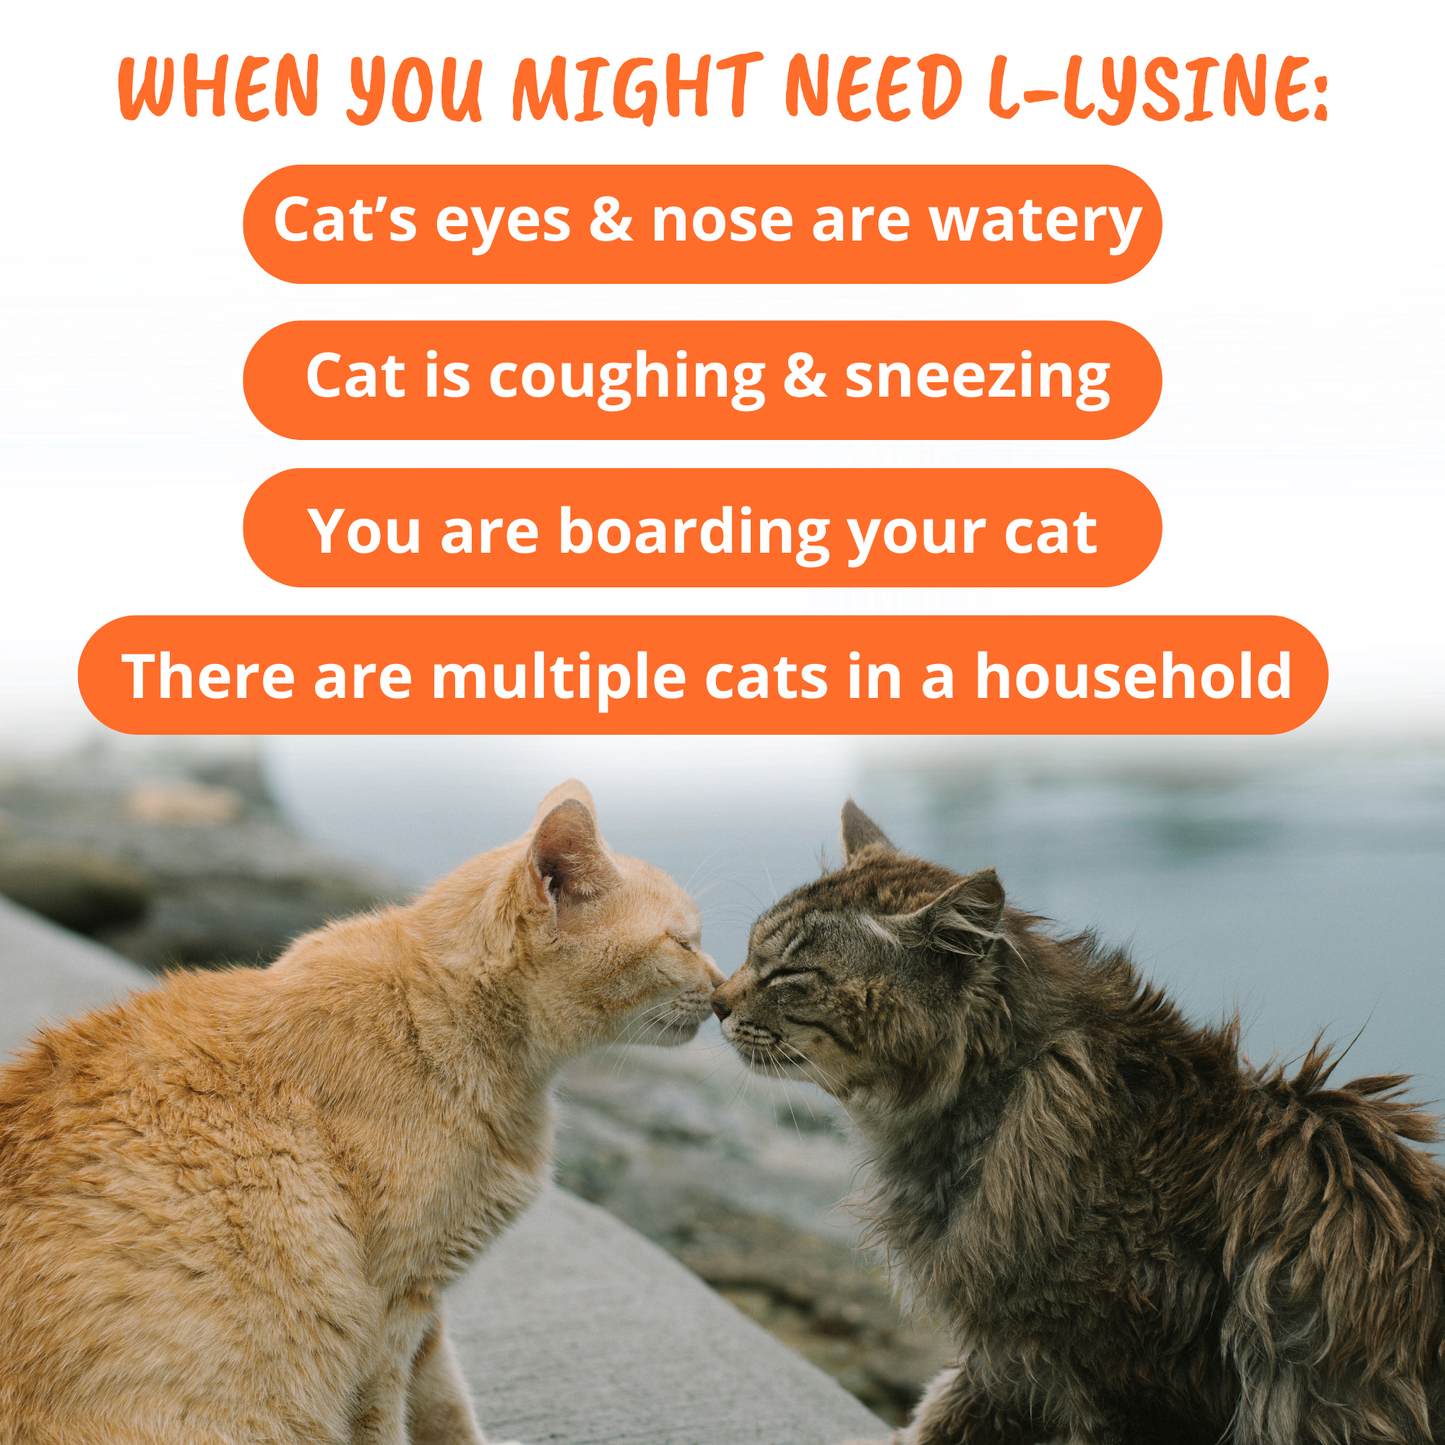 L-lysine Immune Support Chews for Cats